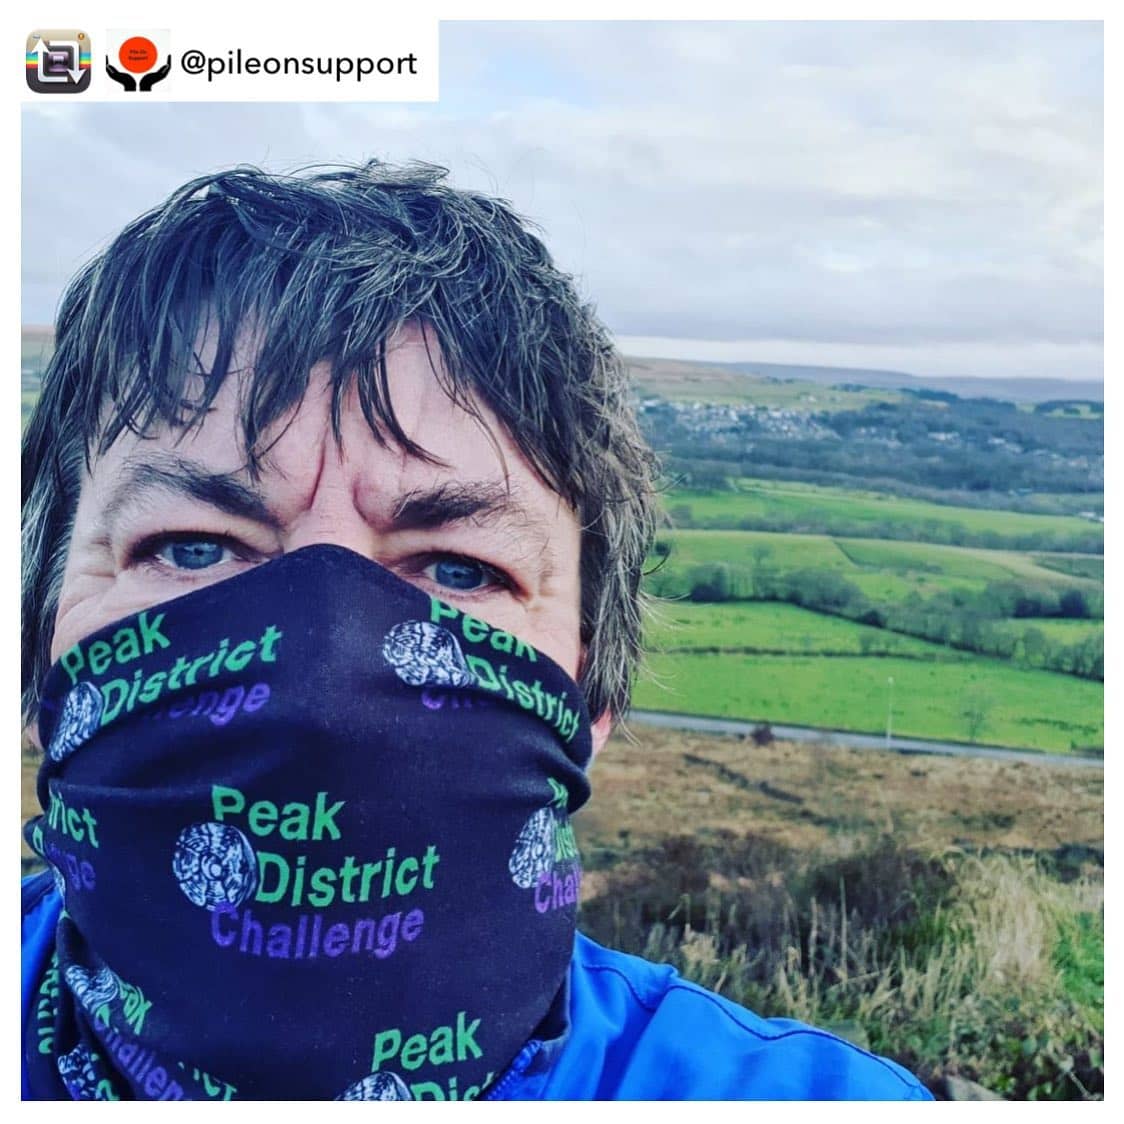 Repost from @pileonsupport using his Peak District Challenge buff for some extra warmth! ⛰🥾⛰

Xma...